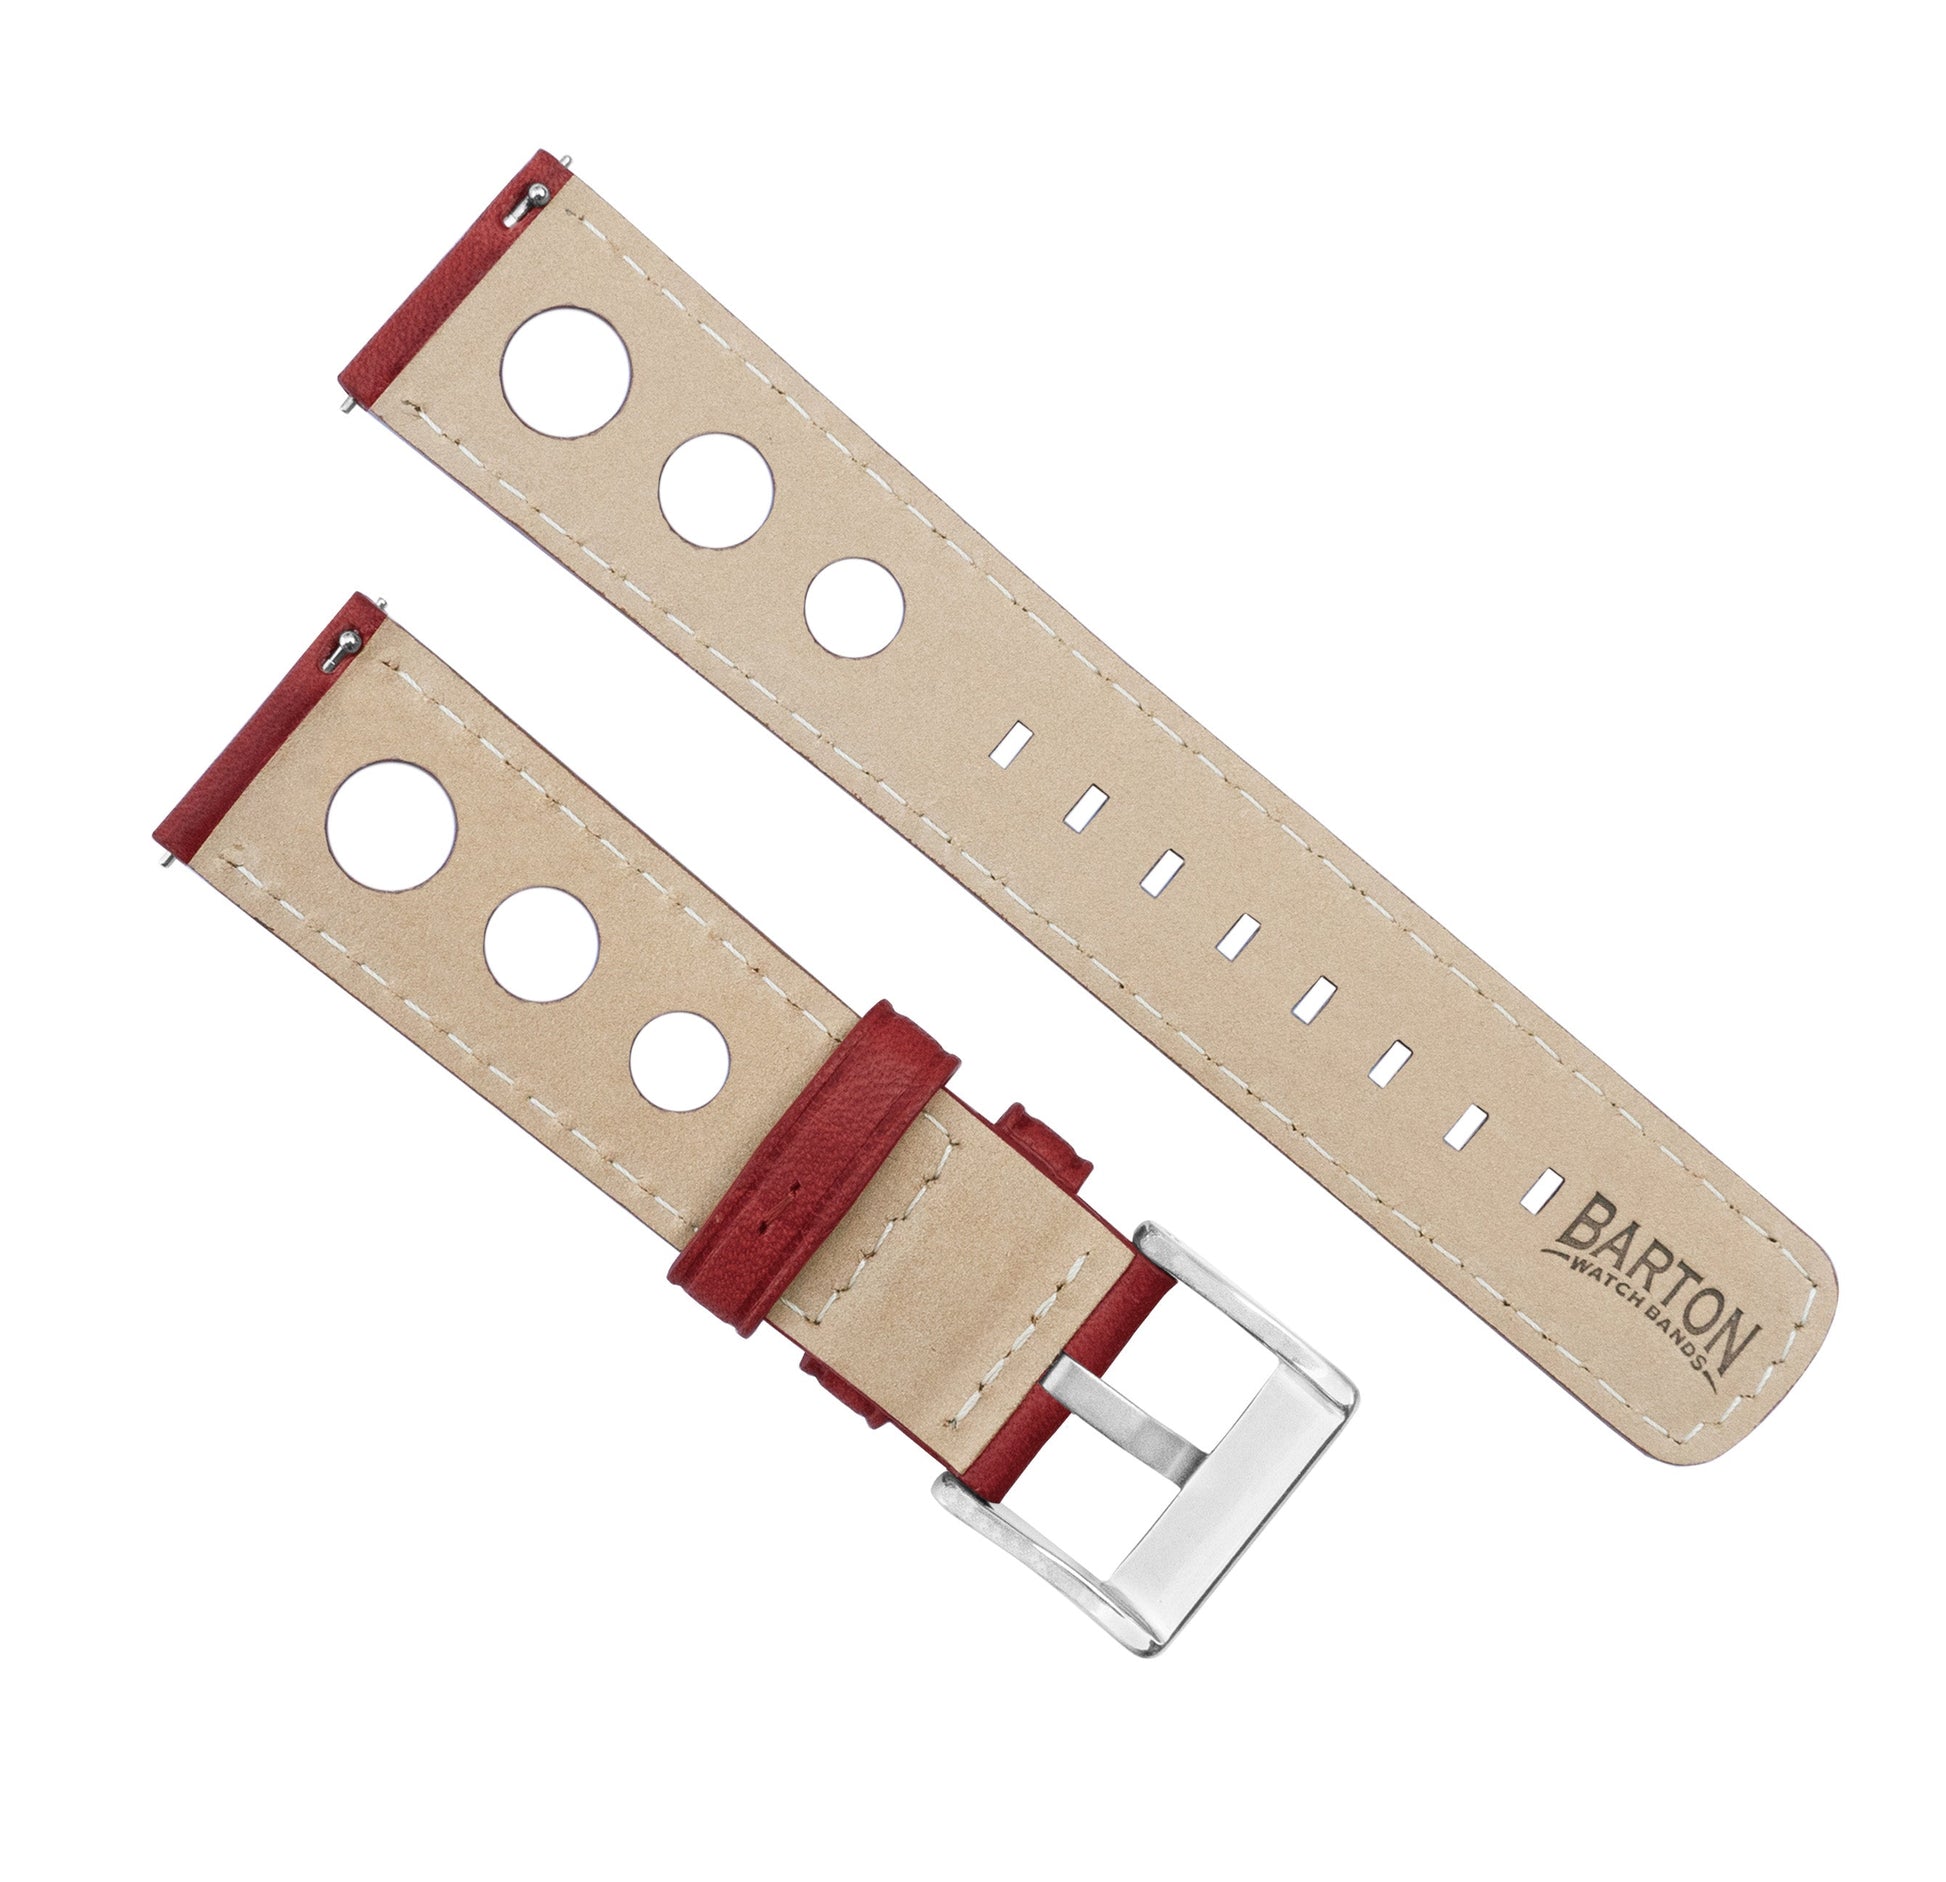 MOONSWATCH Bip | Rally Horween Leather | Crimson Red - Barton Watch Bands